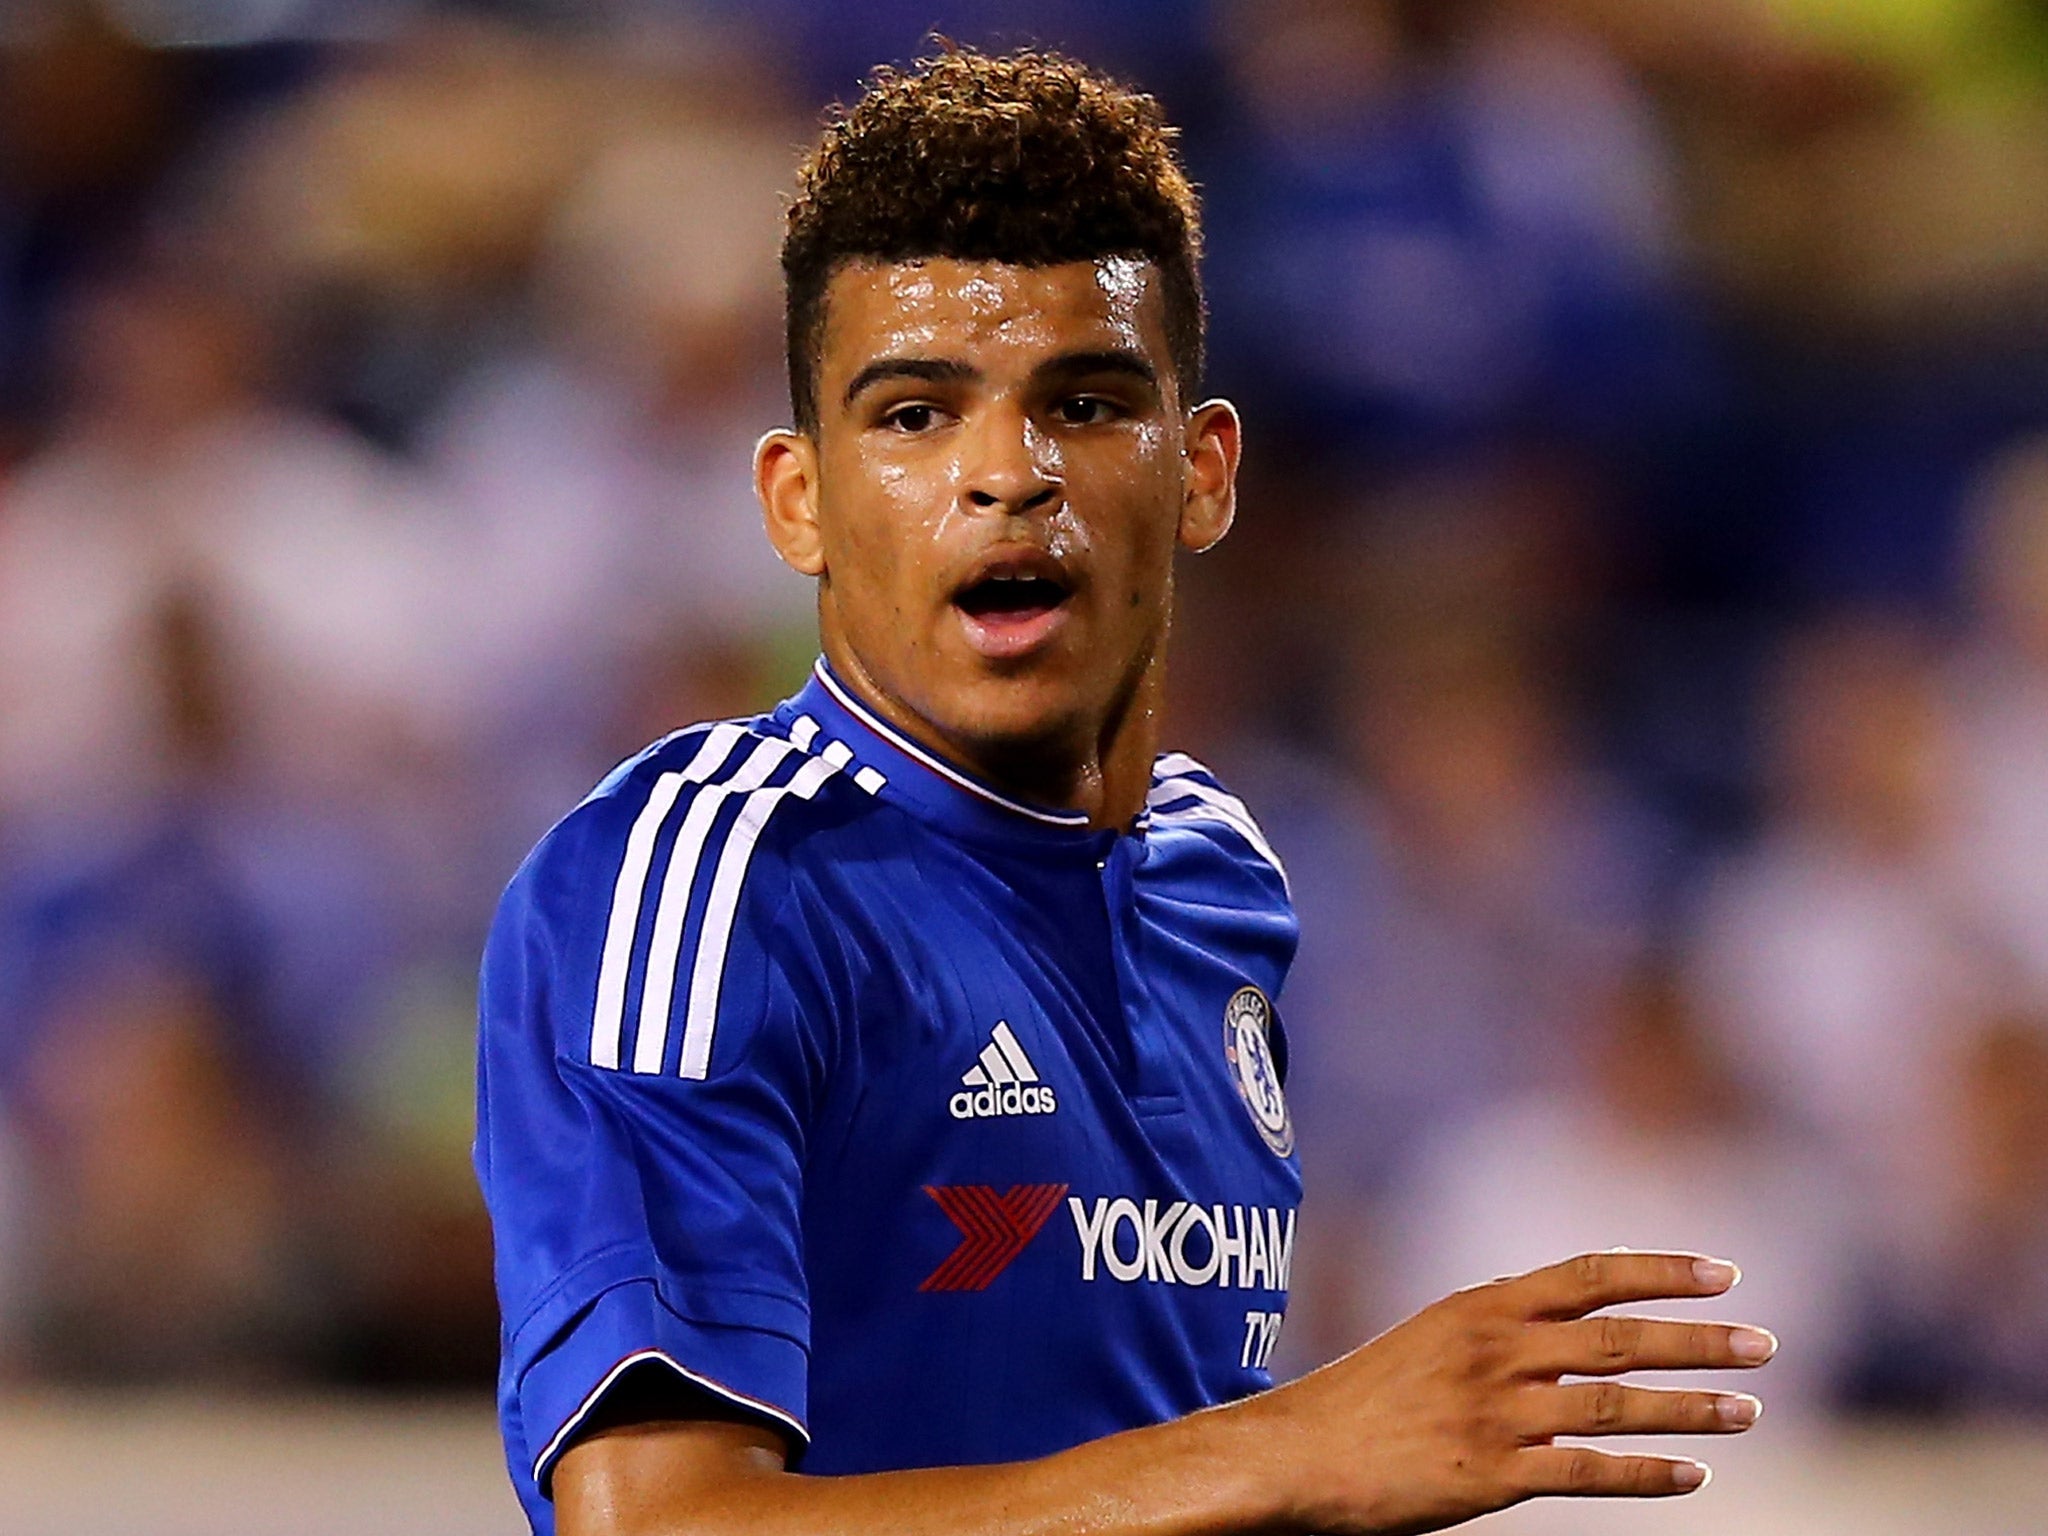 Dominic Solanke wants a new contract worth £50,000-a-week at Chelsea